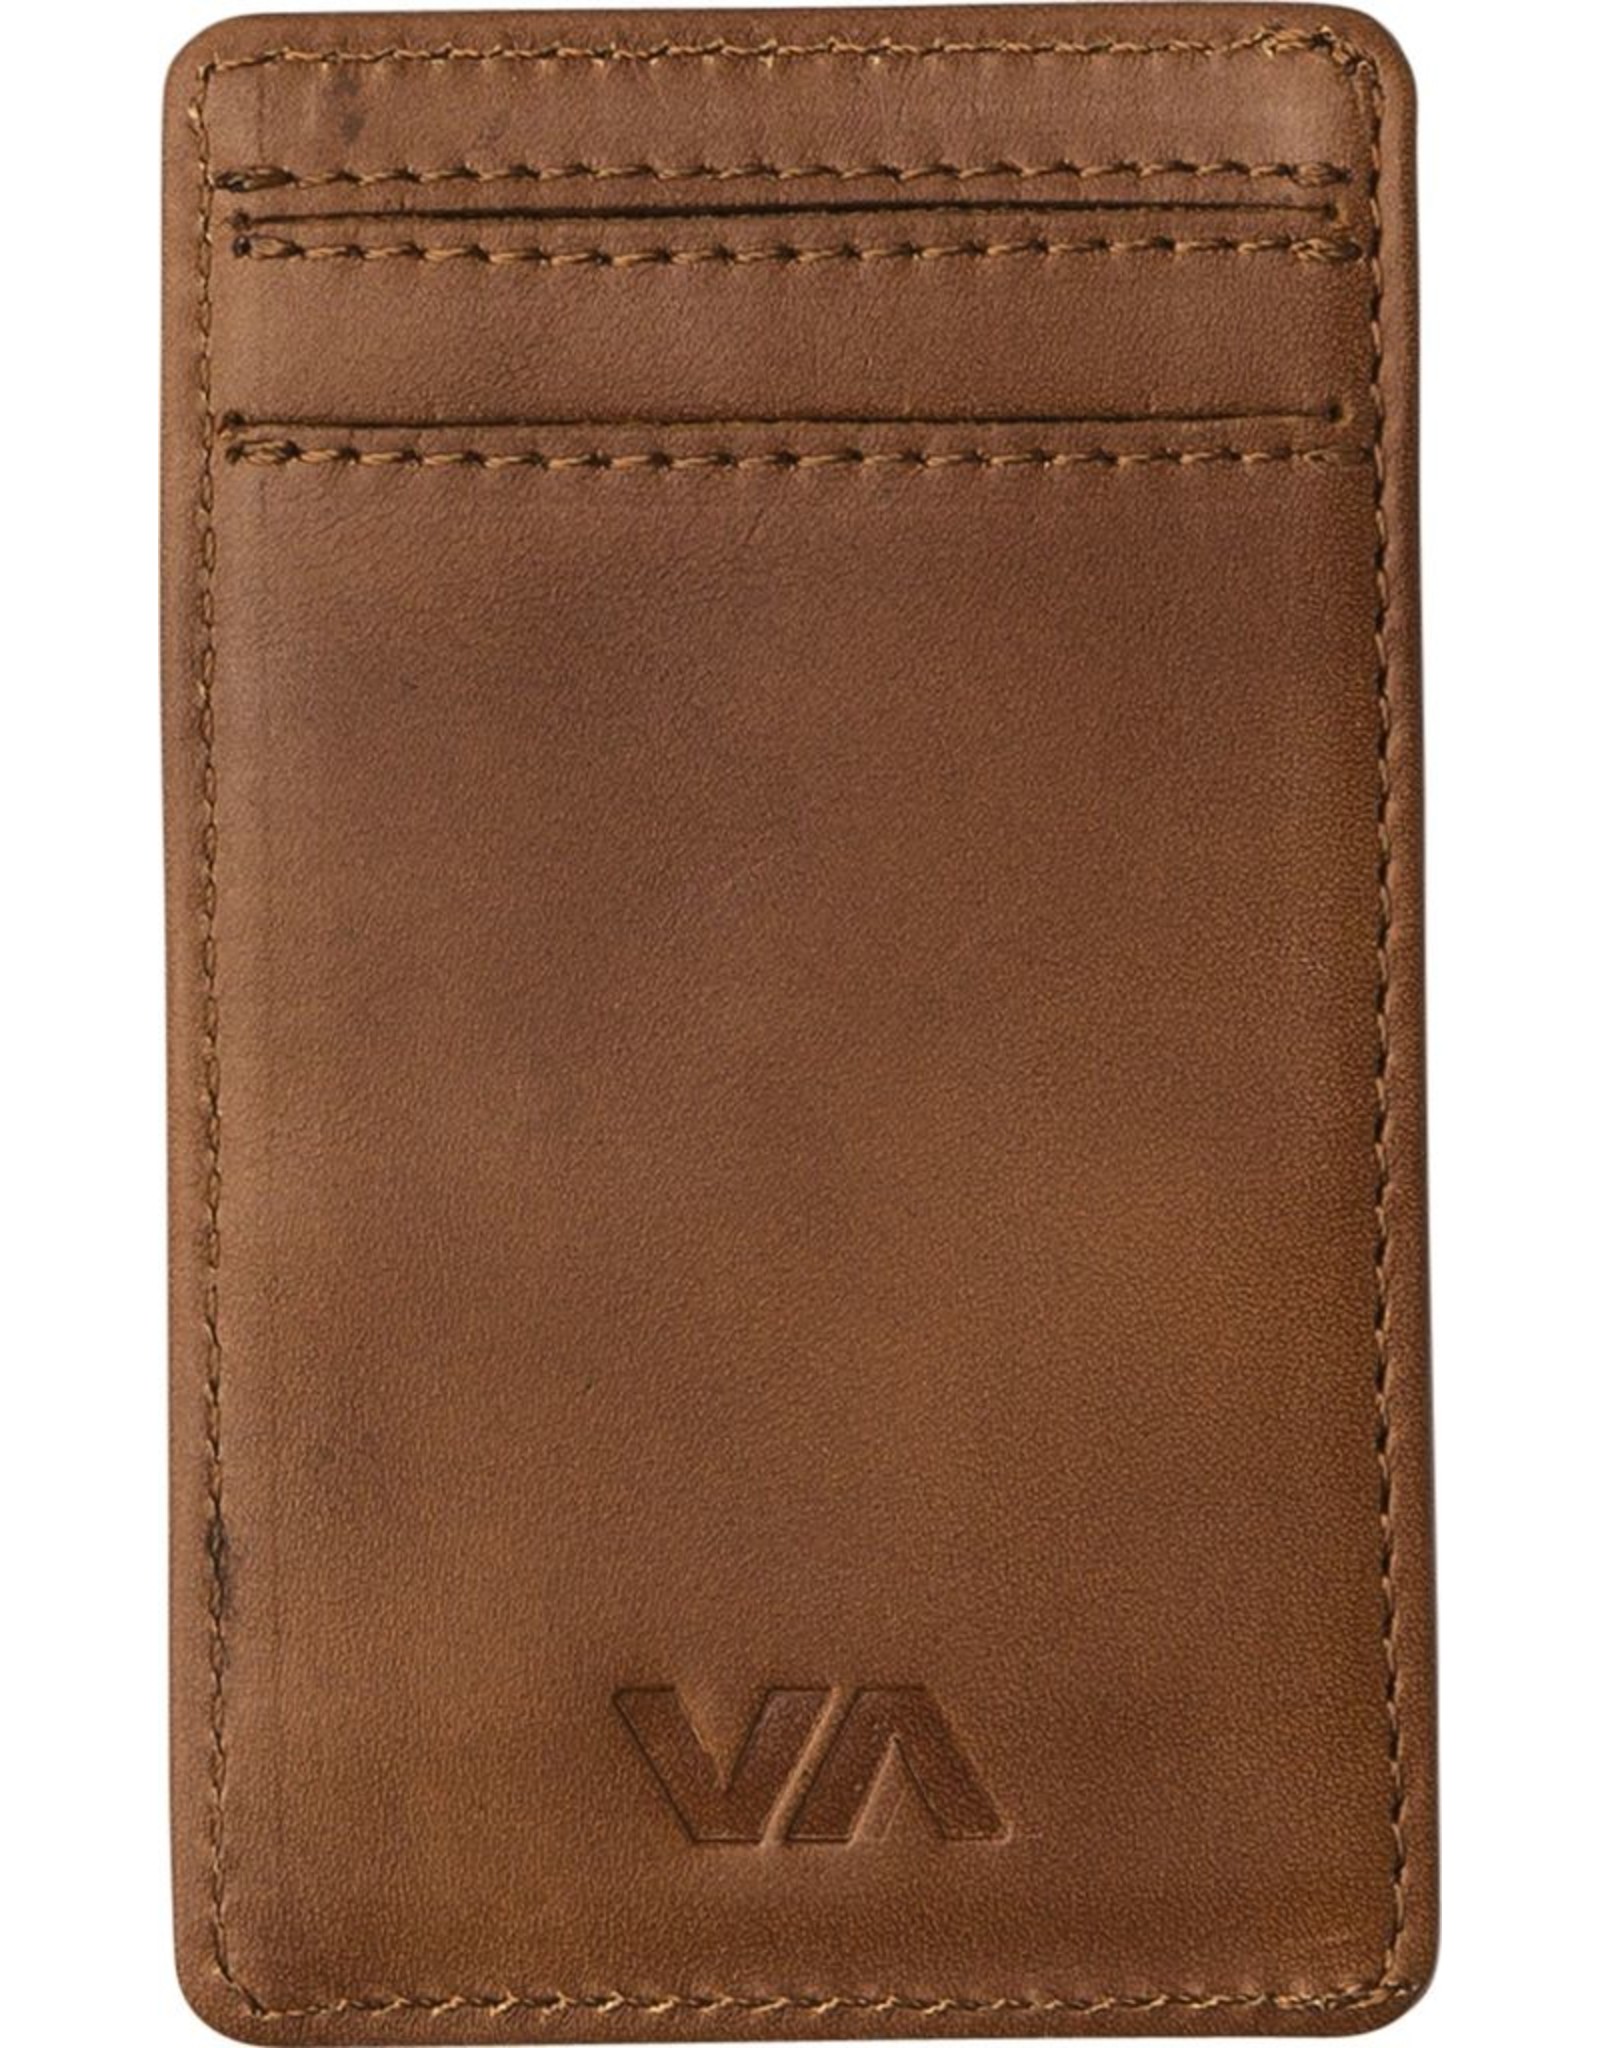 RVCA Clean Card Wallet<br />
Alternate Product View 1 for Clean Card Wallet TAN<br />
Alternate Product View 2 for Clean Card Wallet TAN<br />
CLEAN CARD WALLET